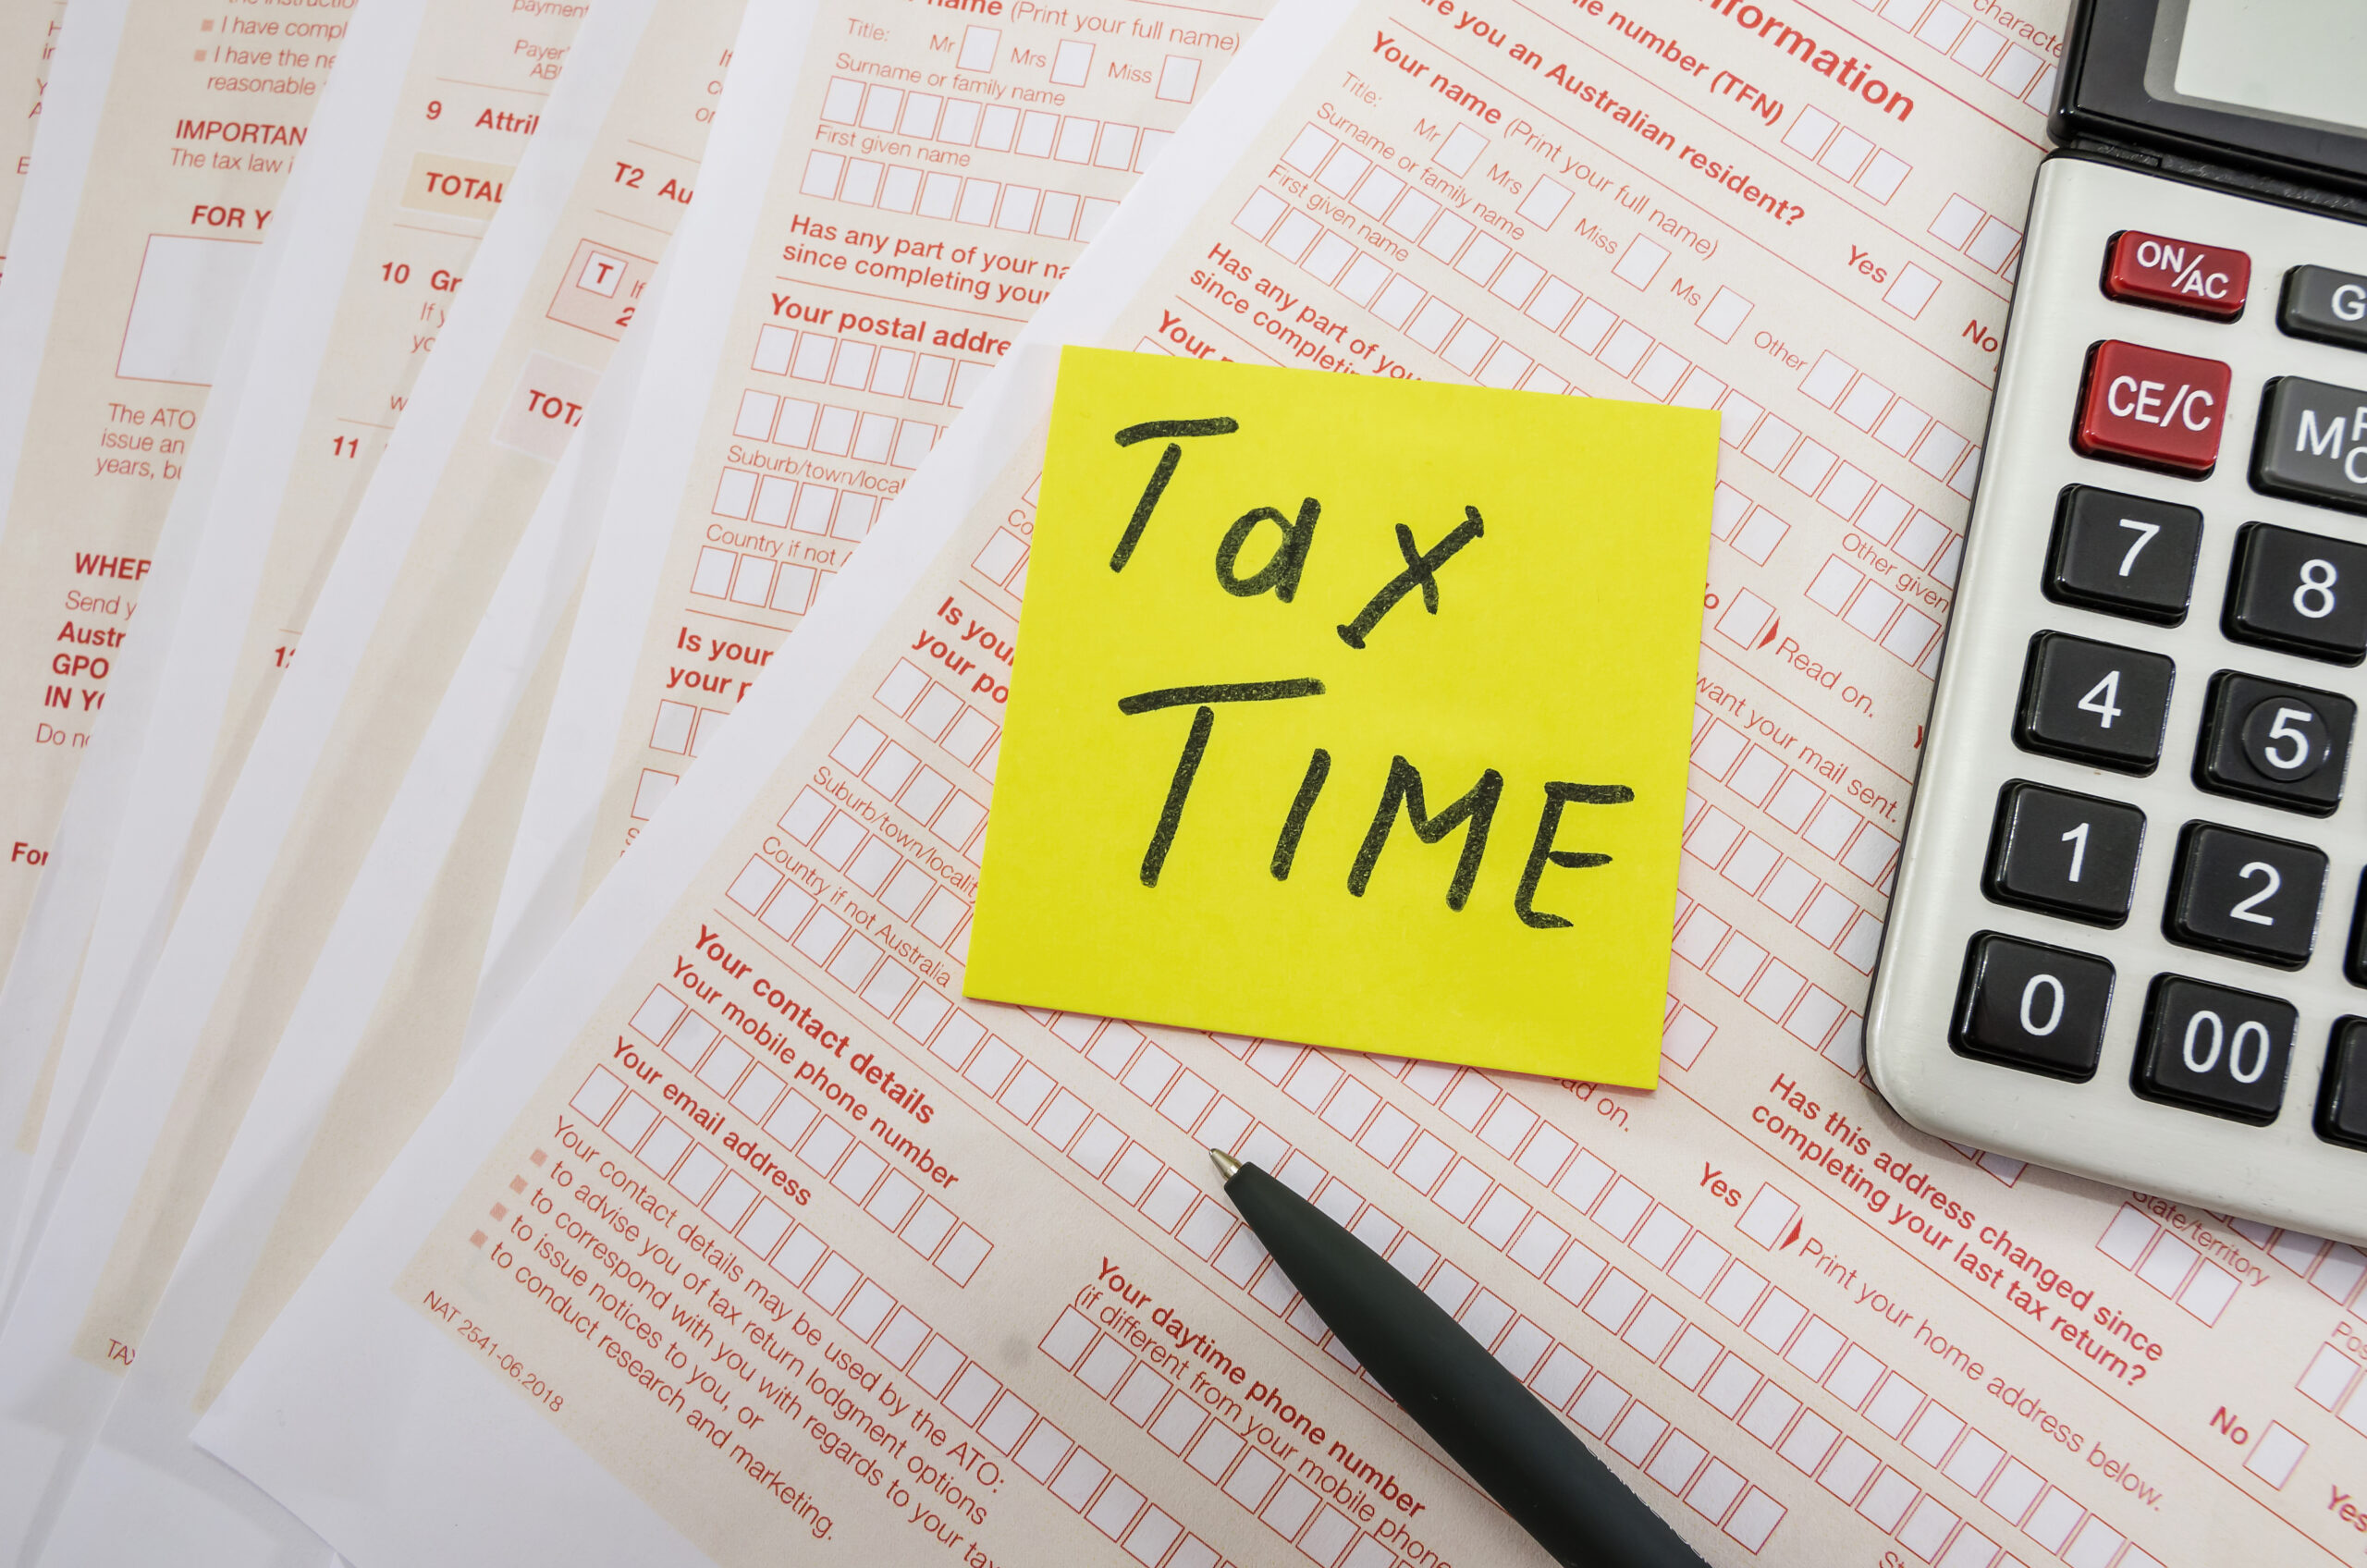 Australian Taxation Office flags three key focus areas for this tax time